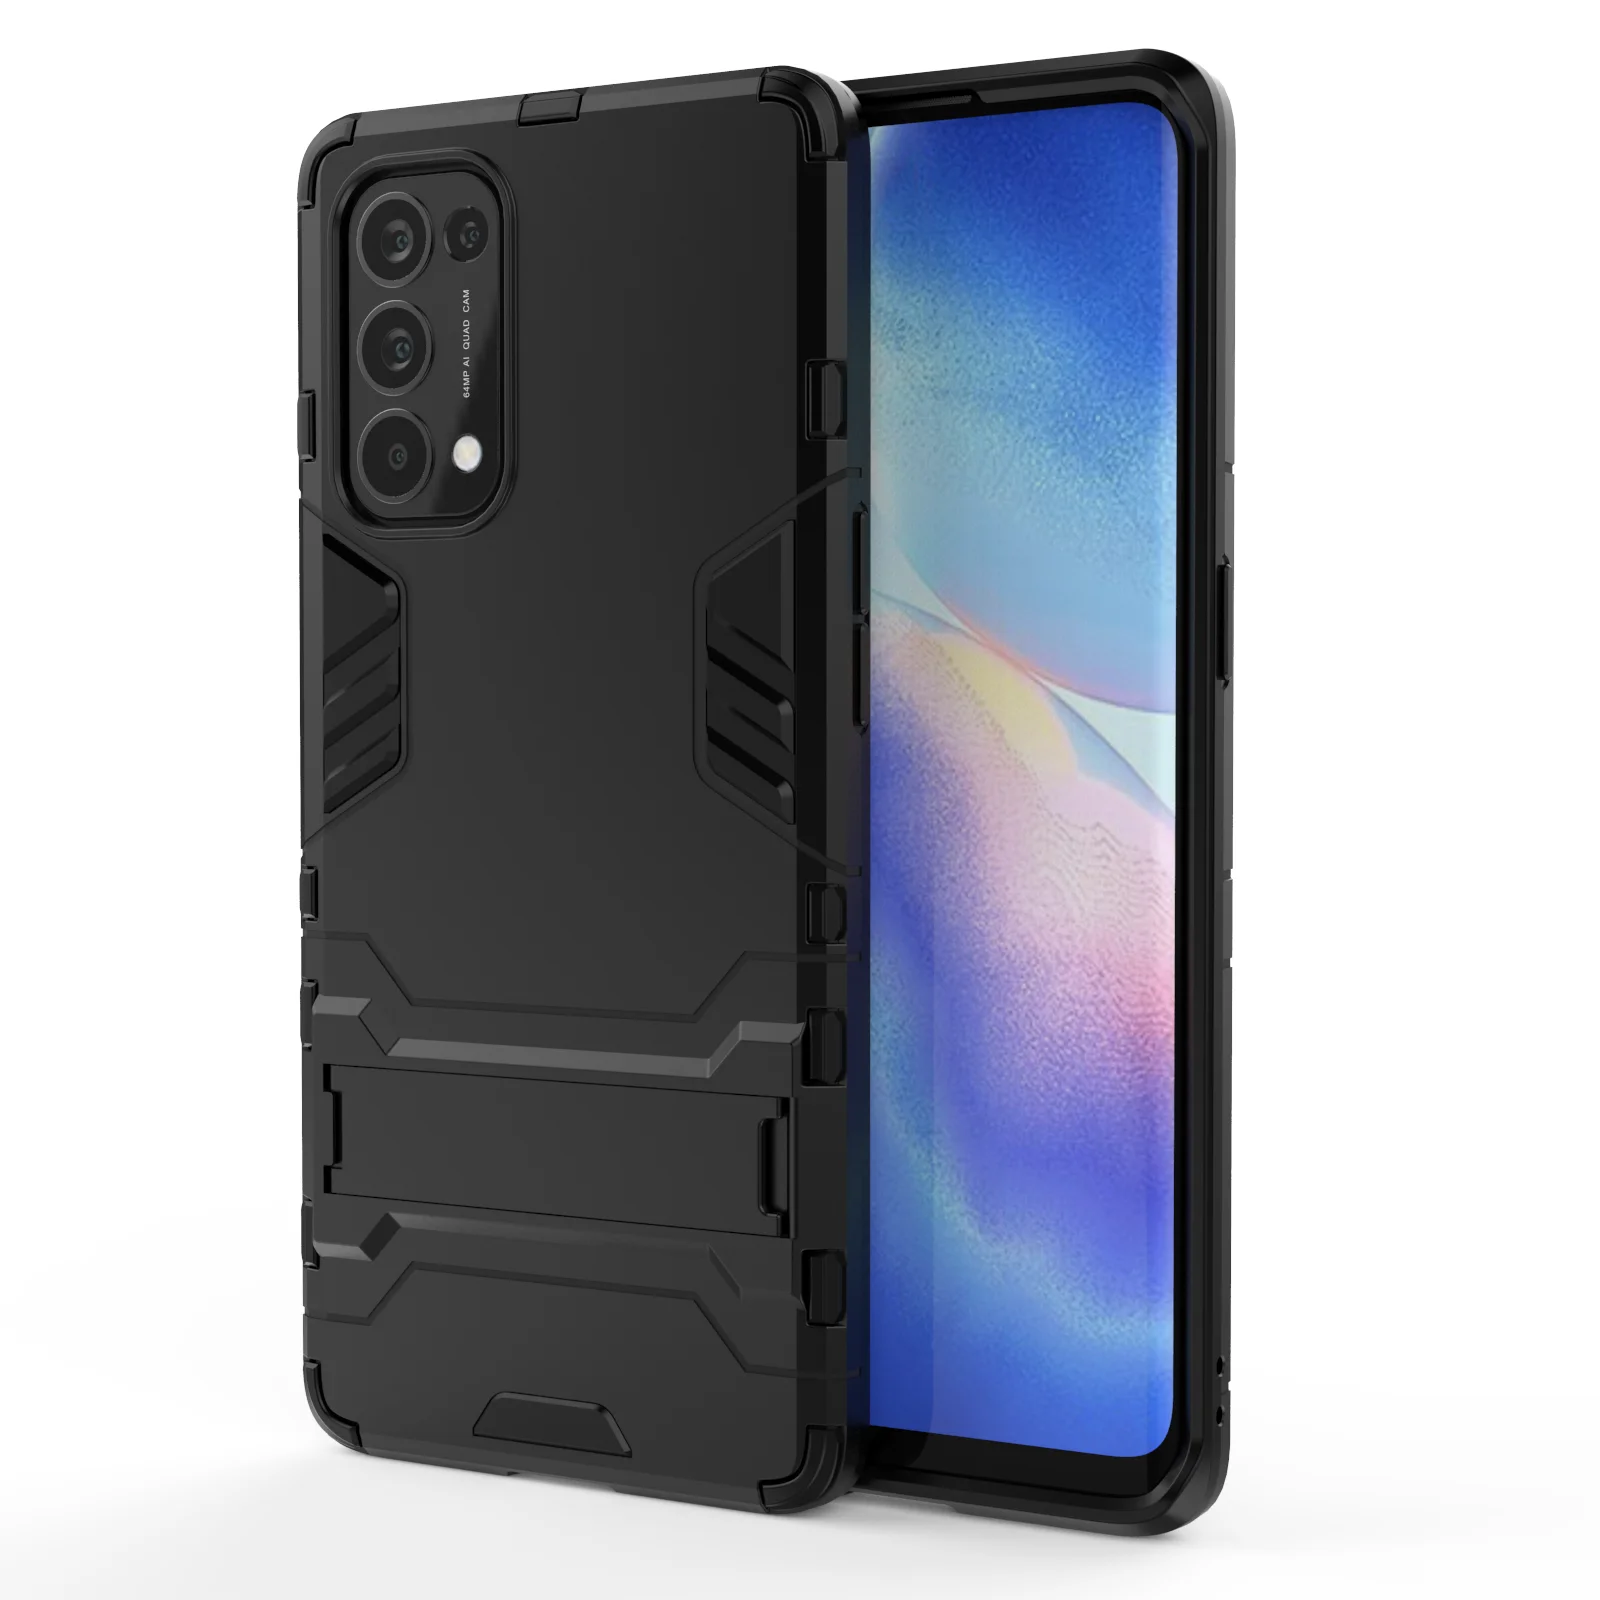 

Highly Quality 2 in 1 Heavy Duty Hybrid Armor Case TPU Hard PC Slim Back Cover Case For OPPO RENO5 PRO, As pictures